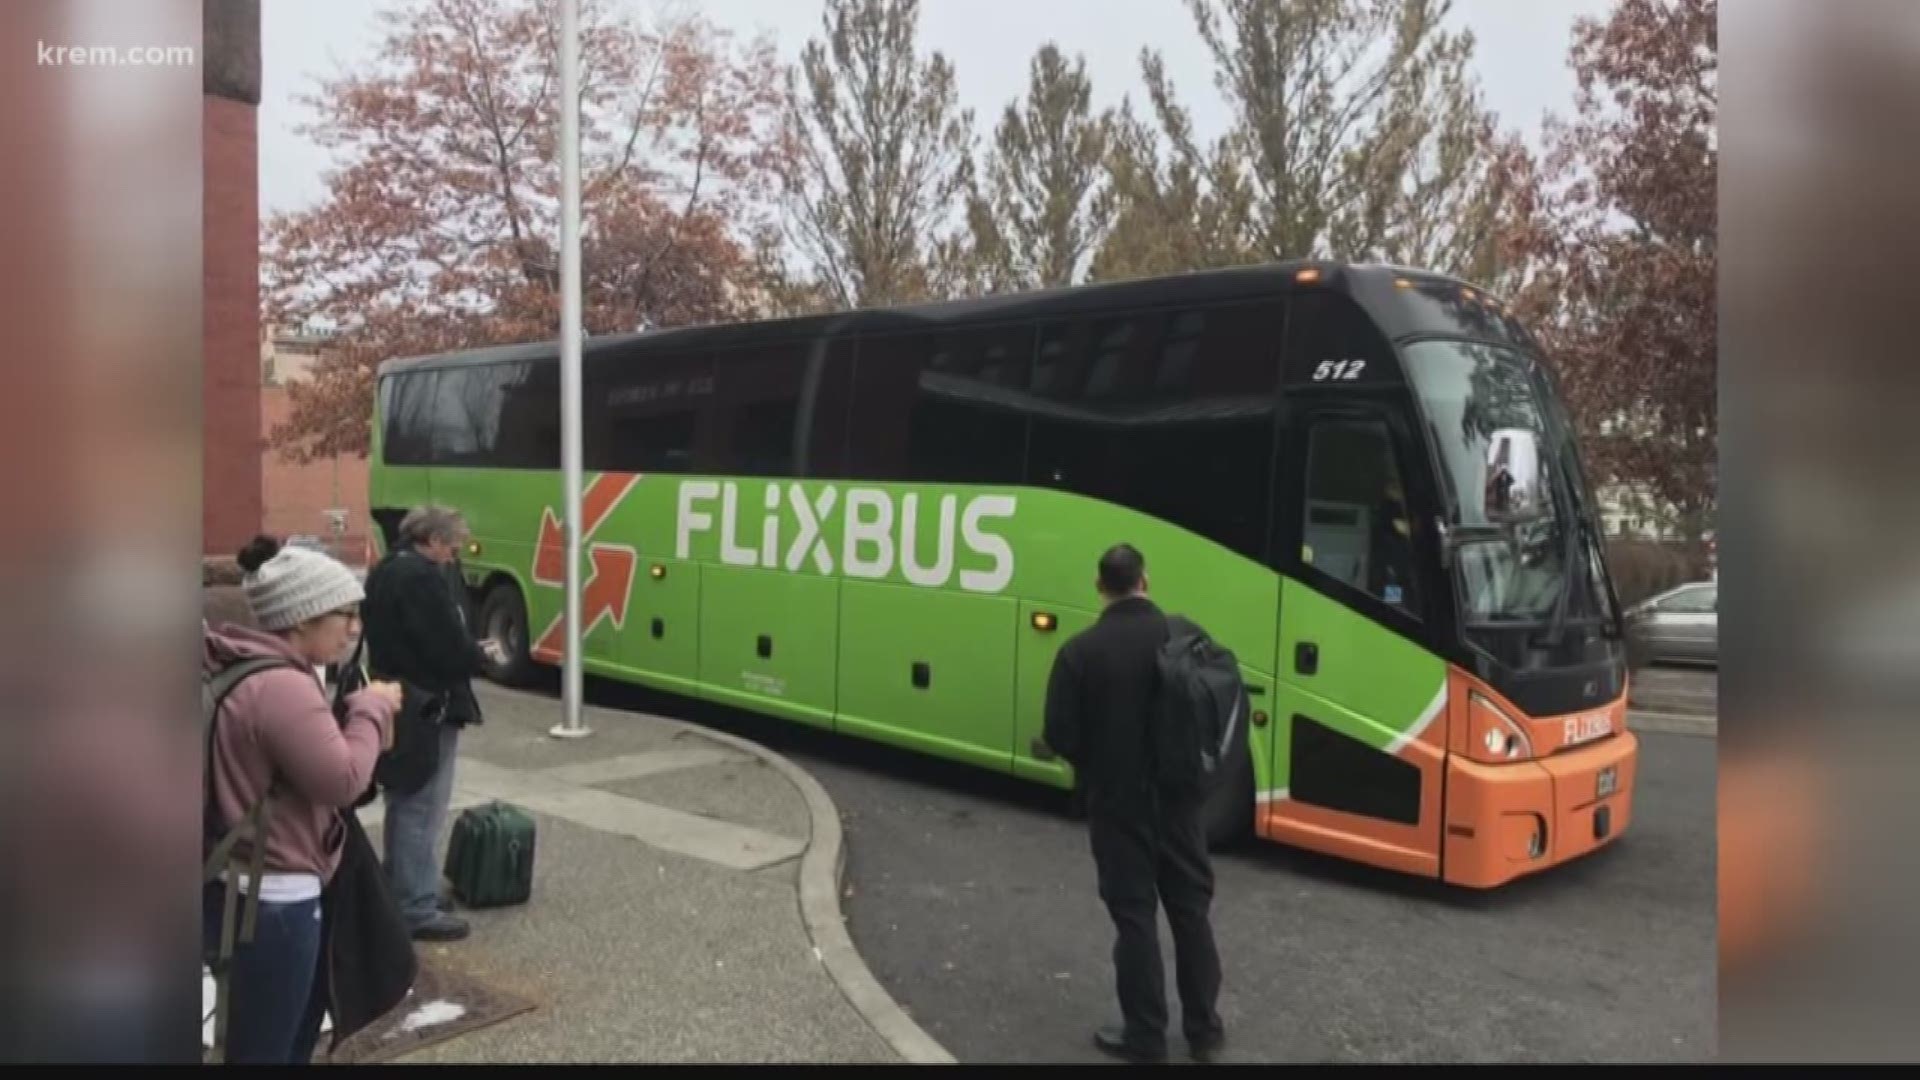 FlixBus offers rides from Spokane to Seattle for as low as $9.99. KREM's Evan Noorani took a ride to Seattle to try it out.